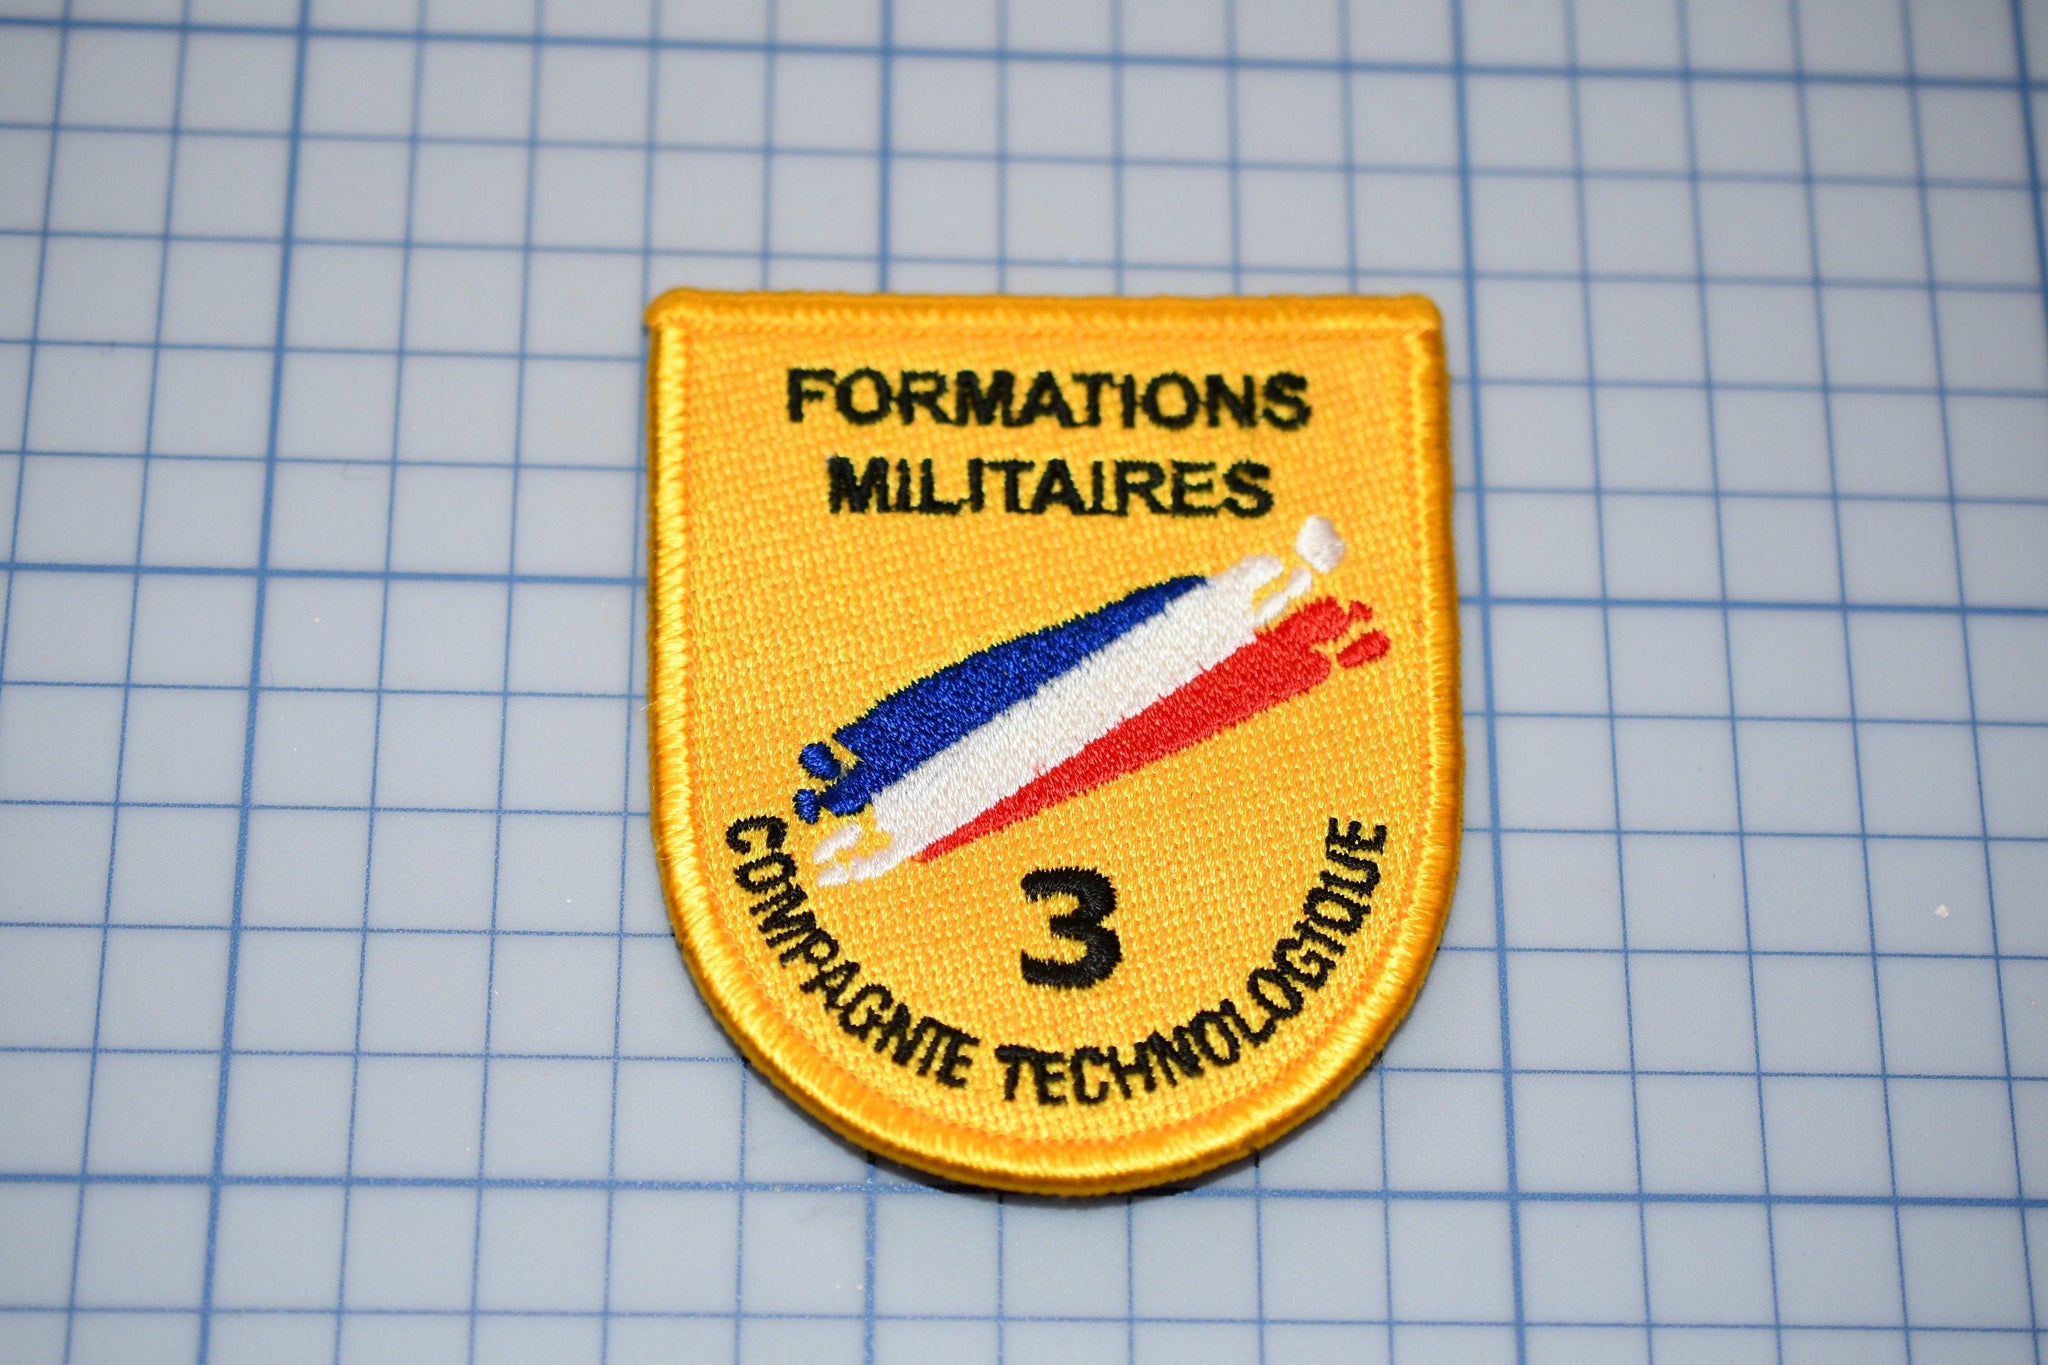 French Military Formations Militaries Compagnte Technologioque 3 Patch (Hook & Loop) (S2)